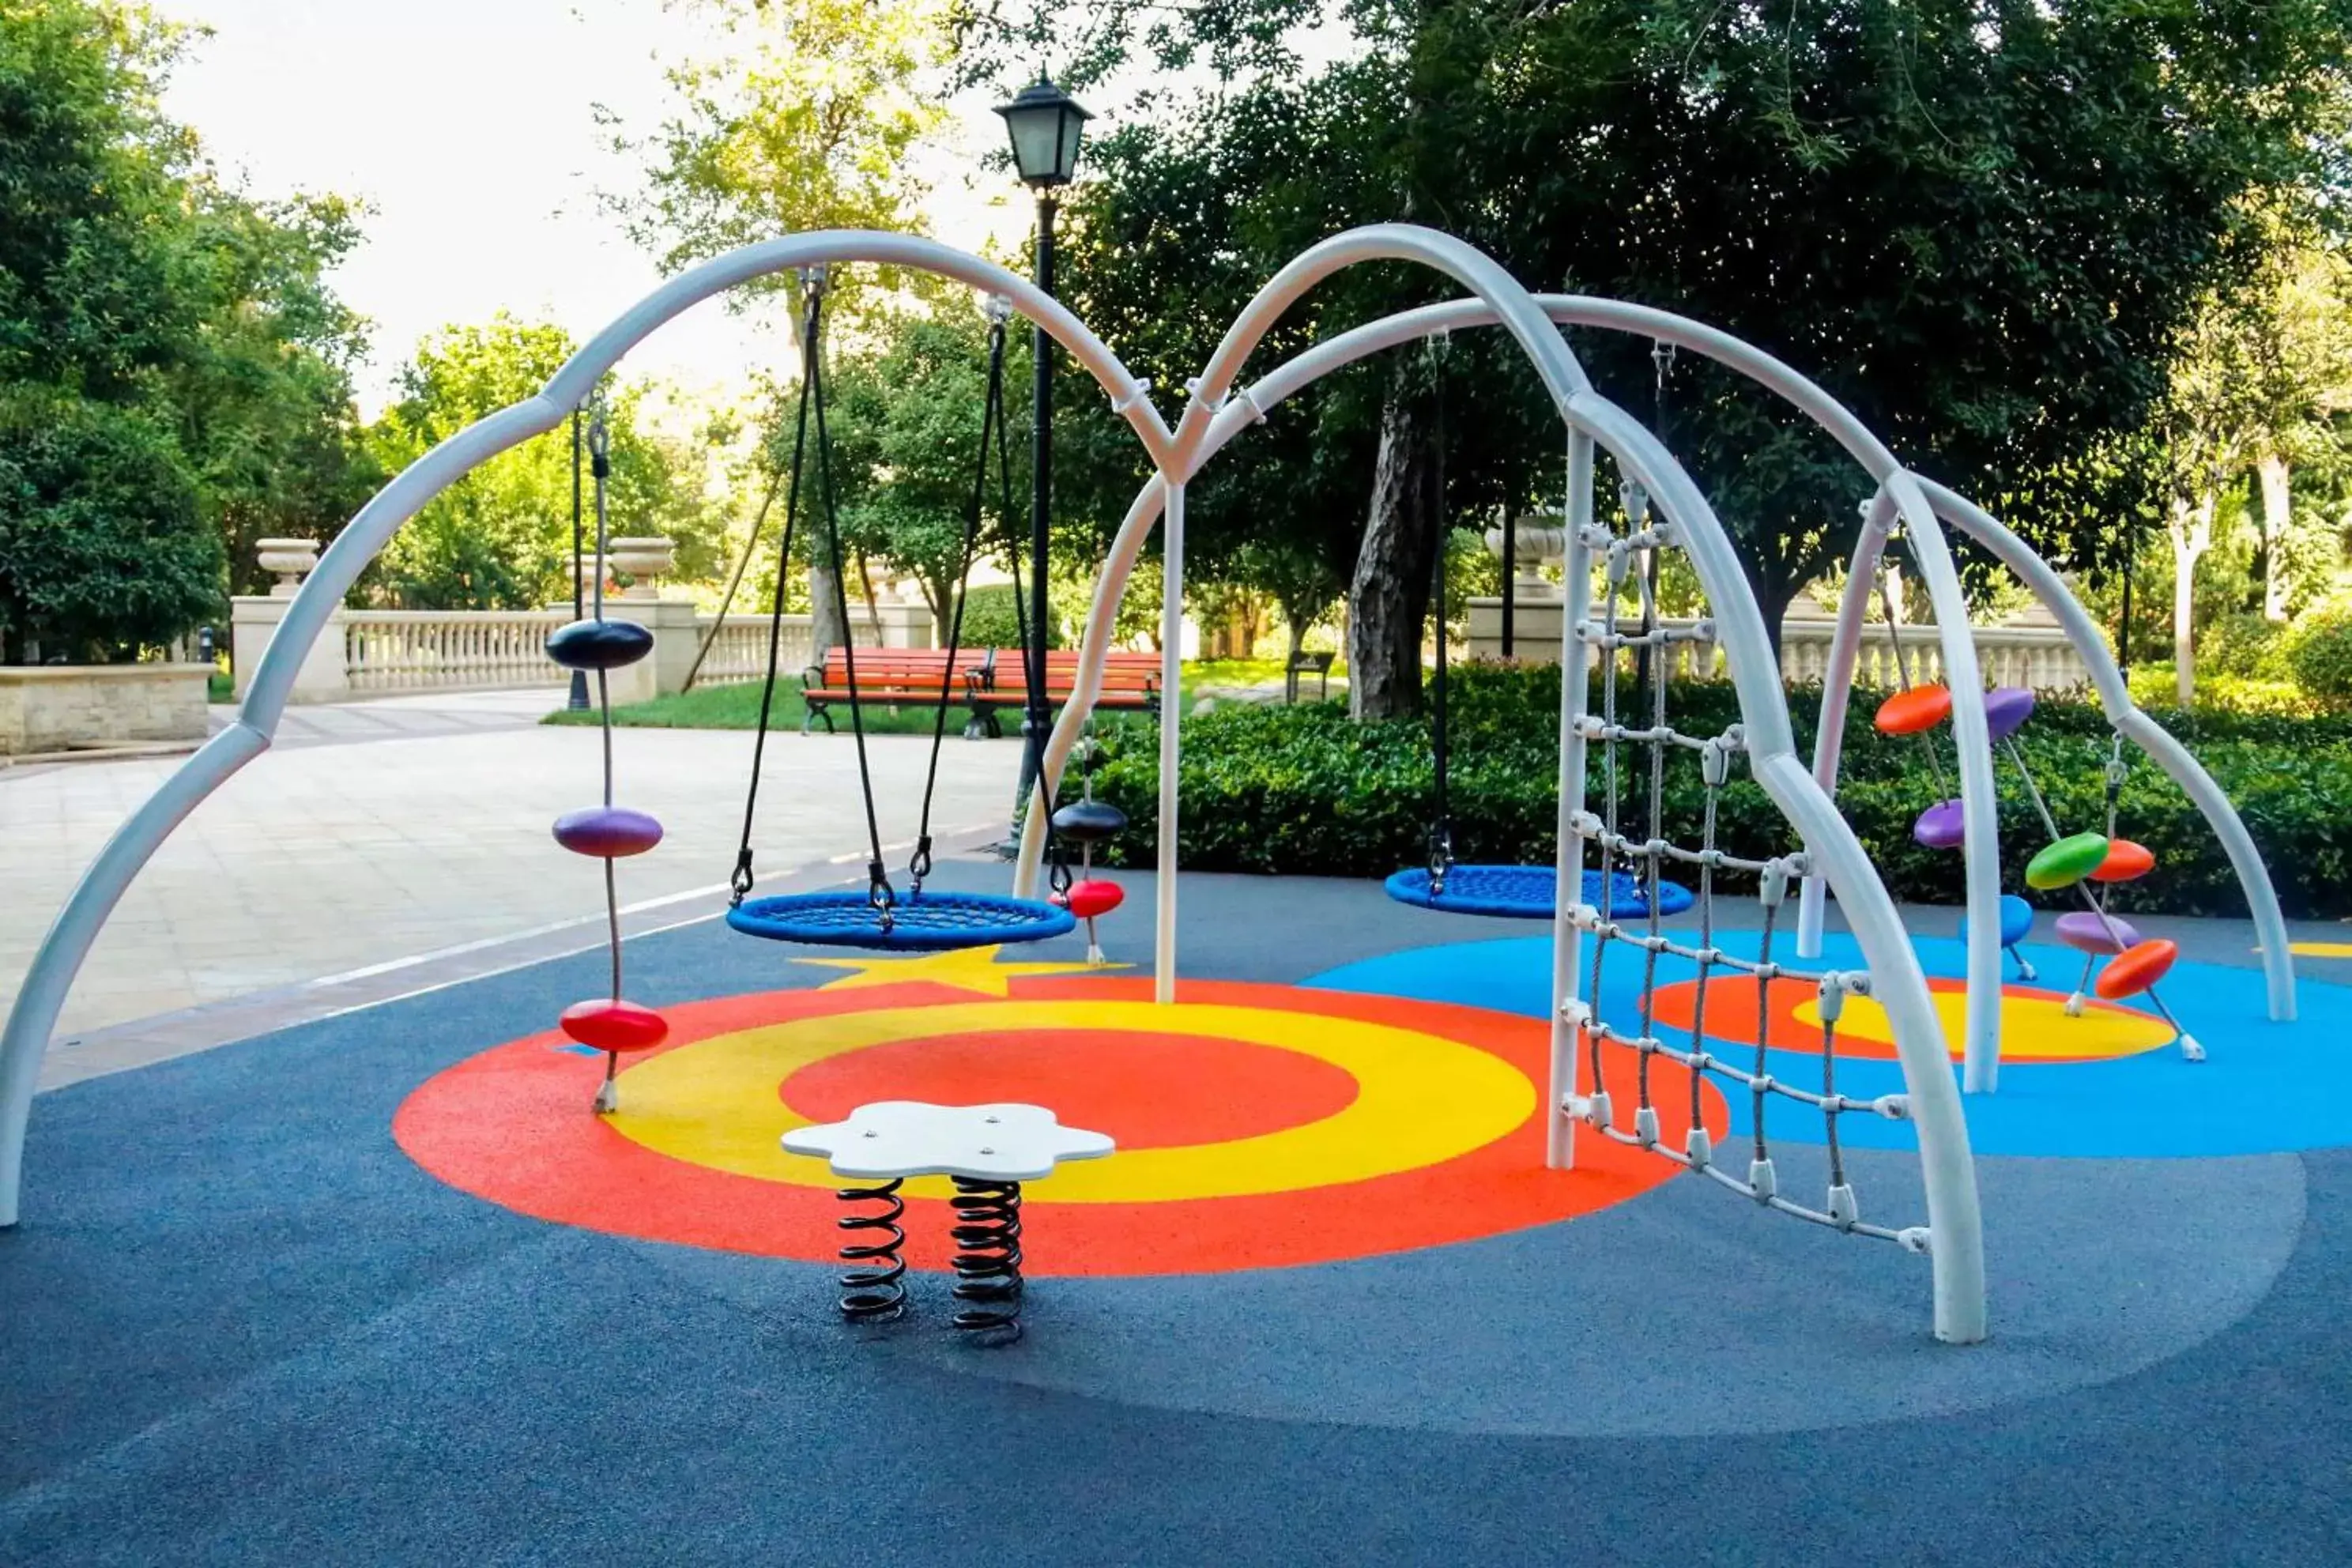 On site, Children's Play Area in Wyndham Qingdao